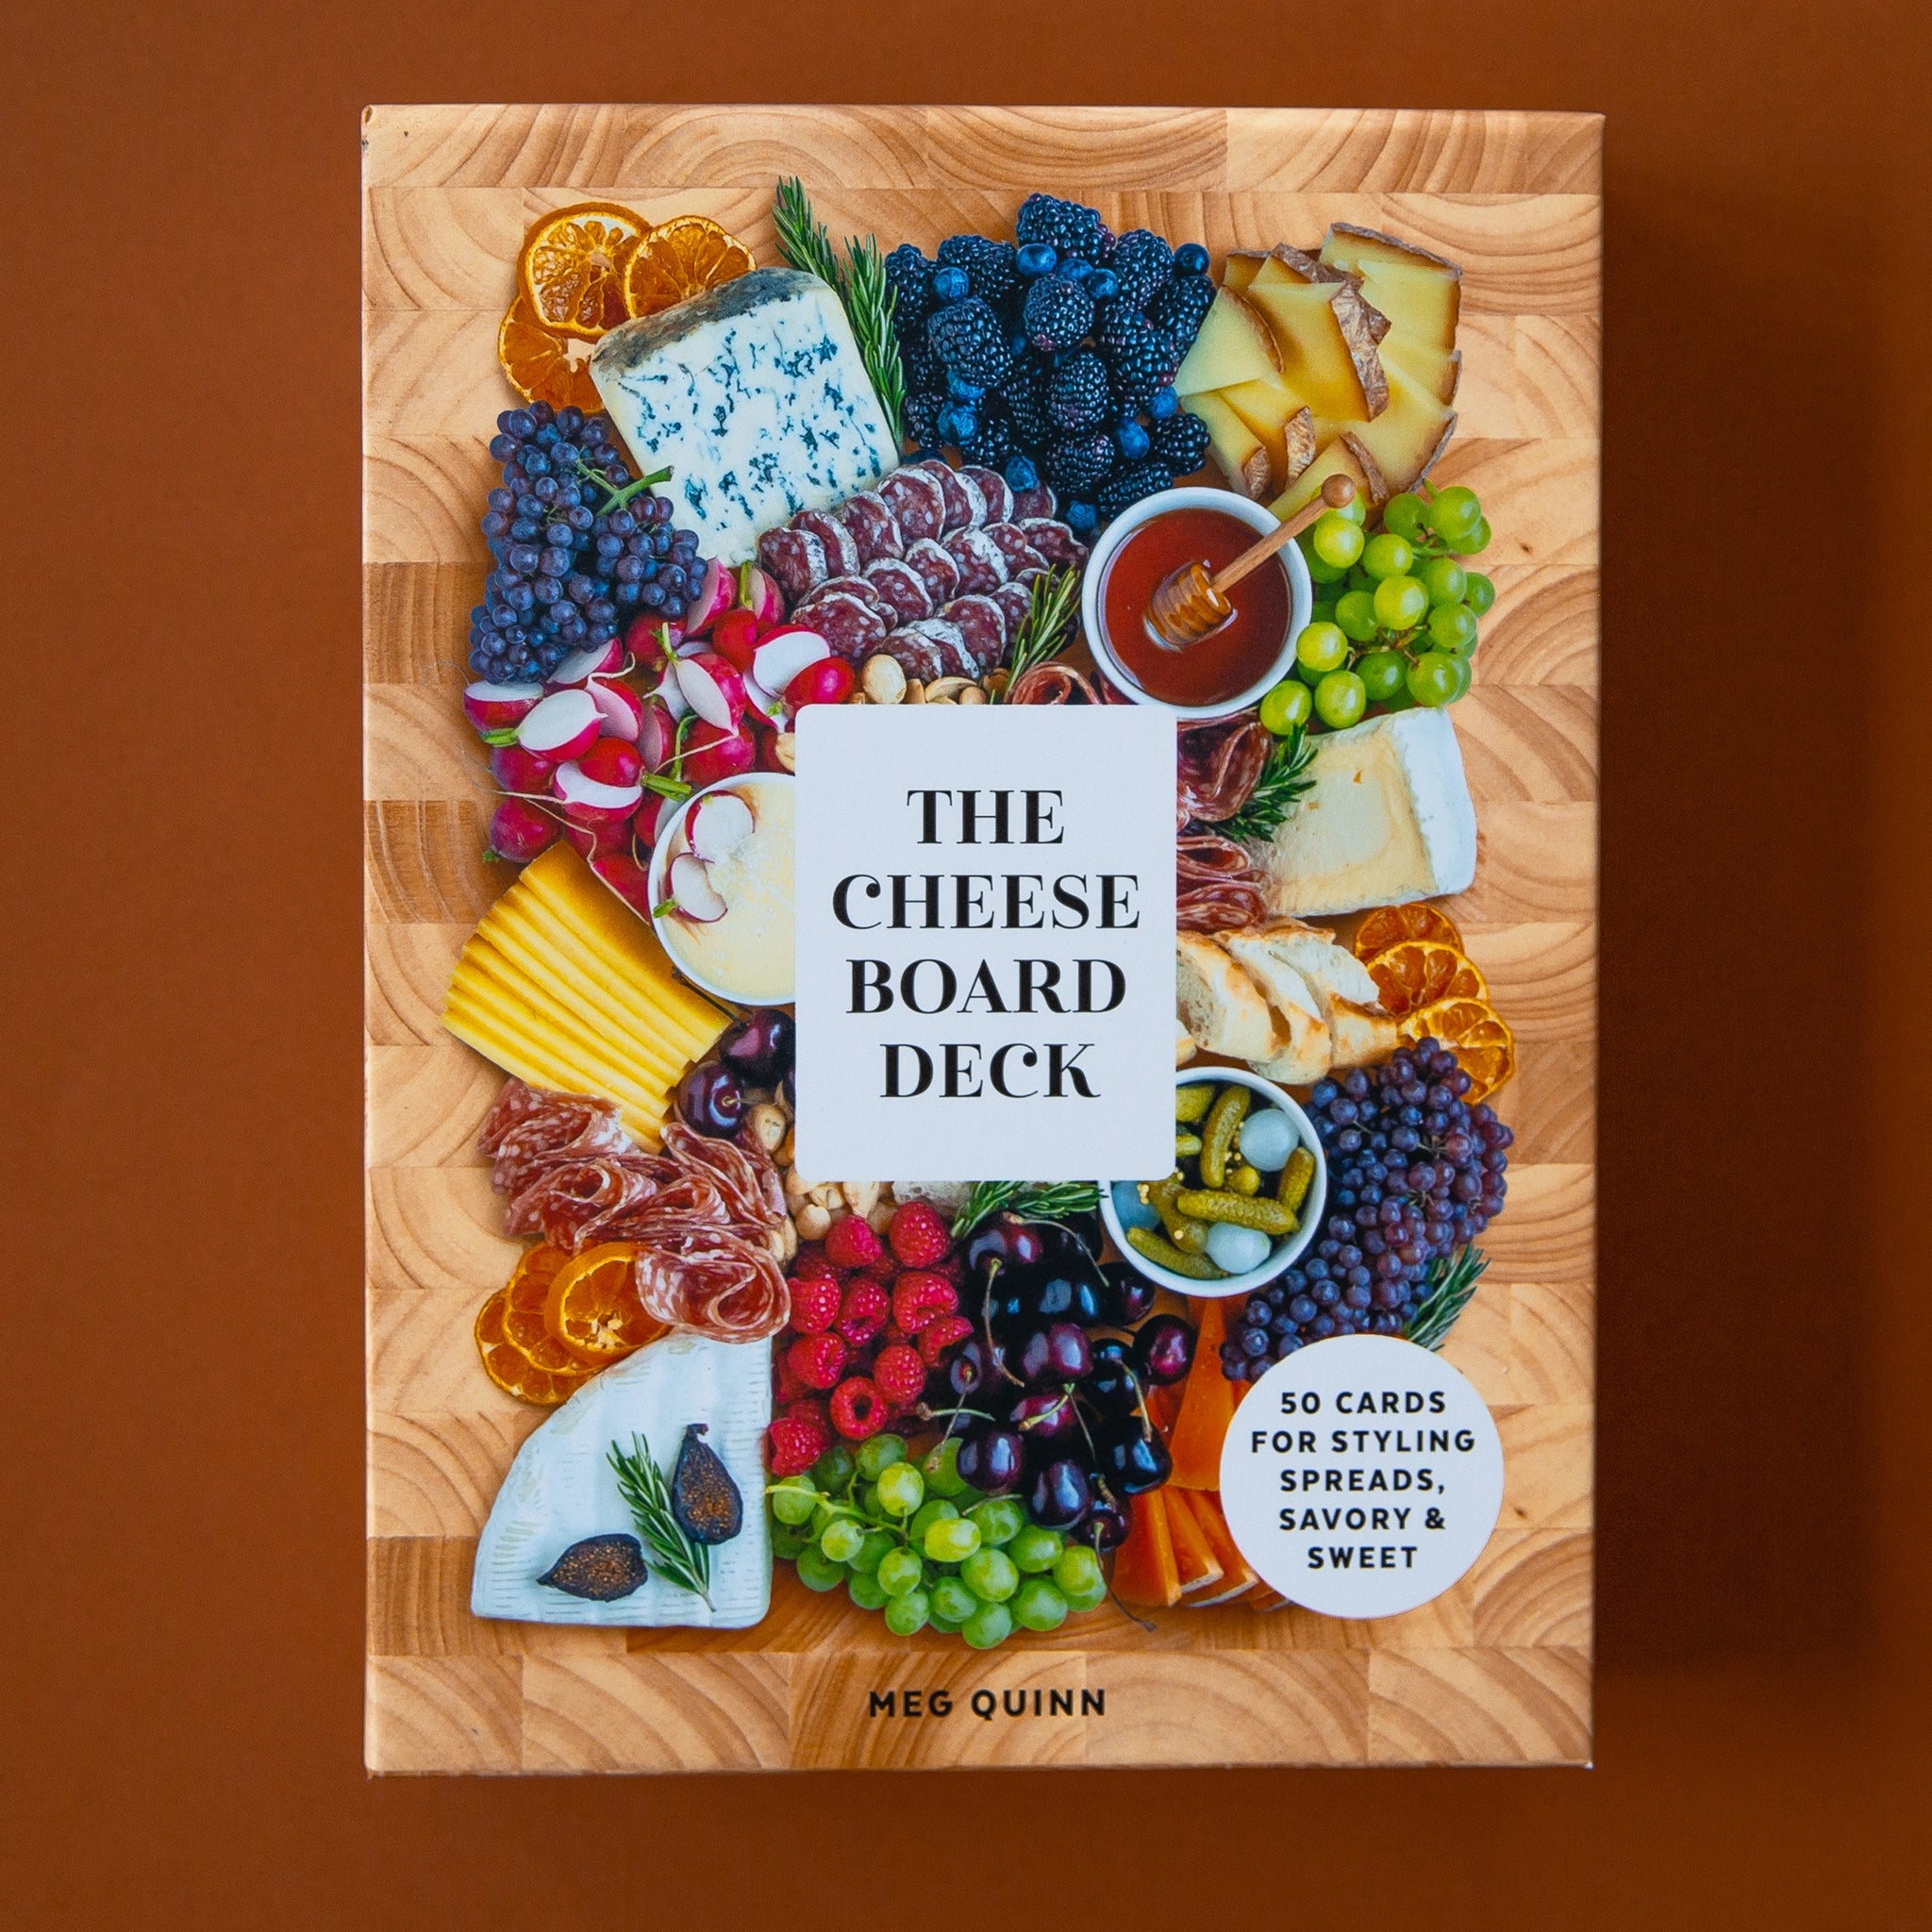 The front cover of box looks like a cheese board with an assortment of cheeses, meats and fruits along with a white square in the center that says, "The Cheese Board Deck".